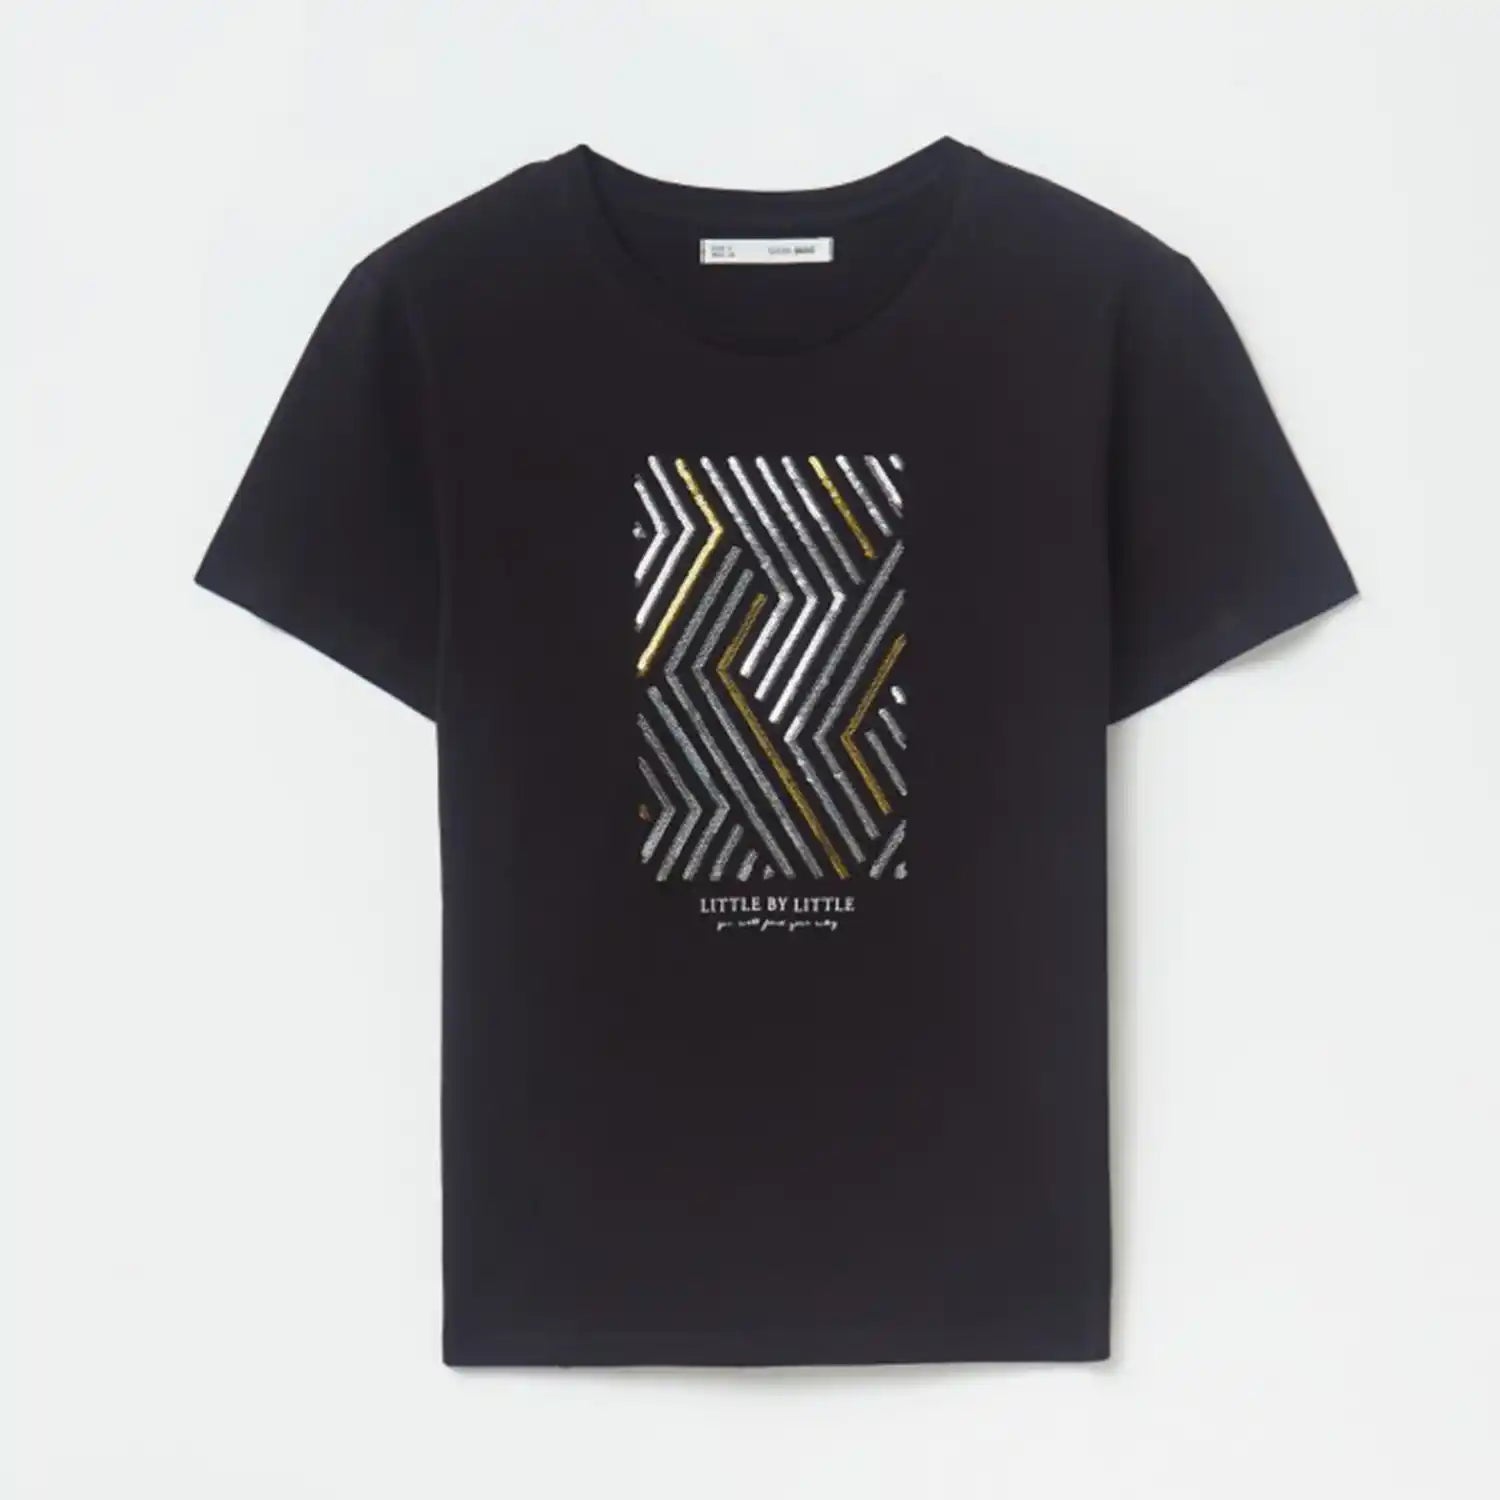 Sequined graphic T-shirt